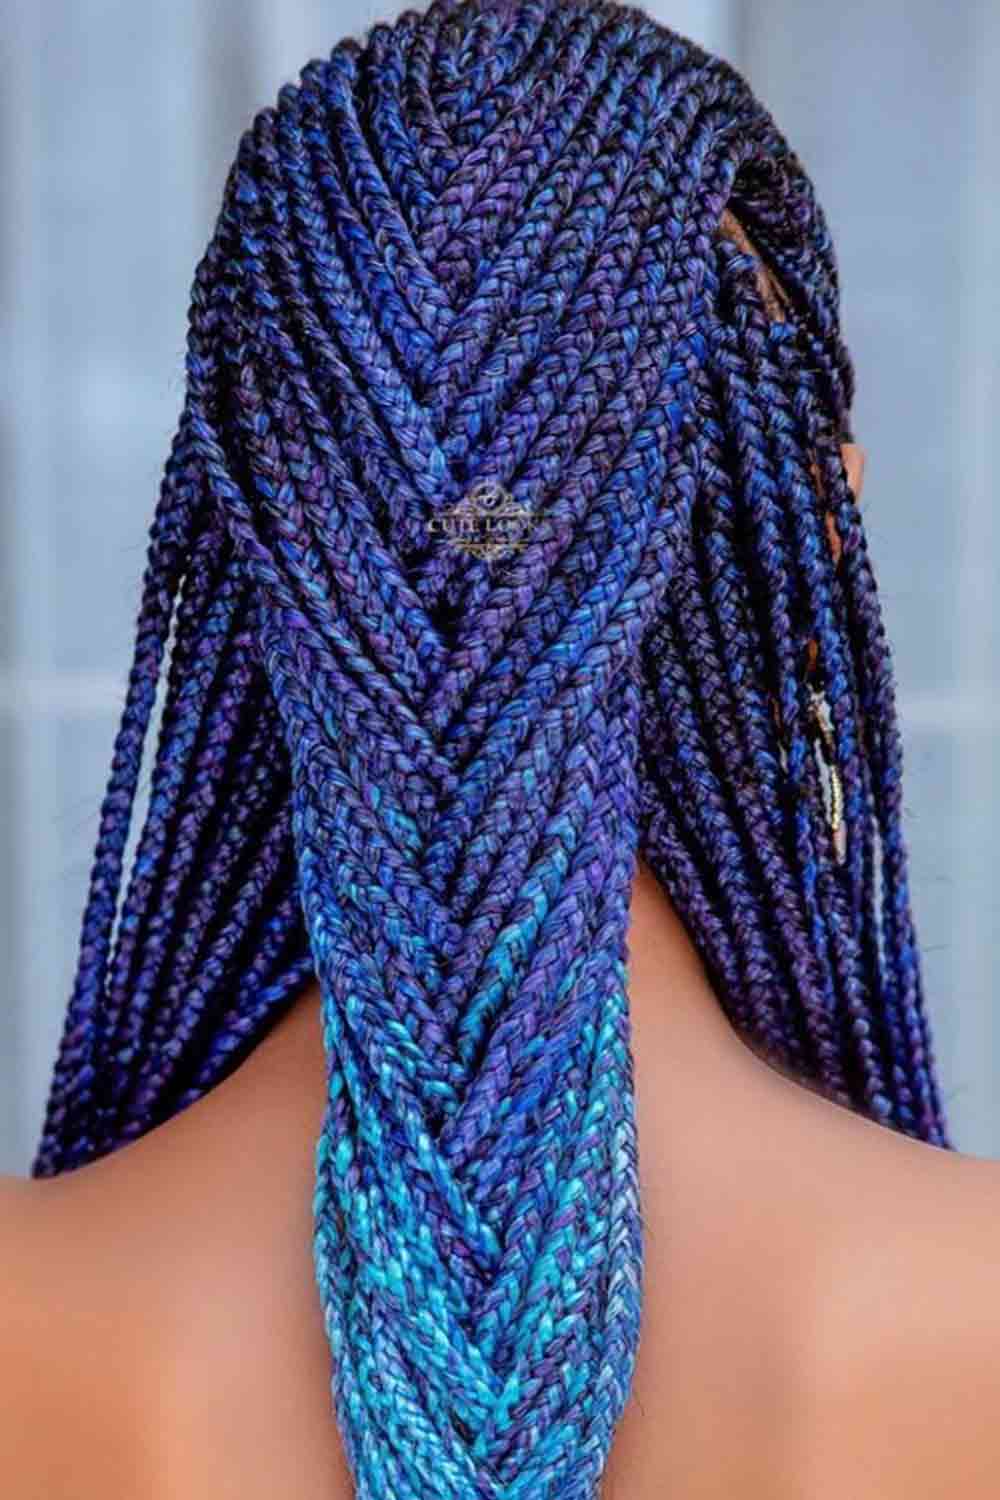 B;ue Fulani Braids With Ombre Effect #ombrehair #bluehairstyles